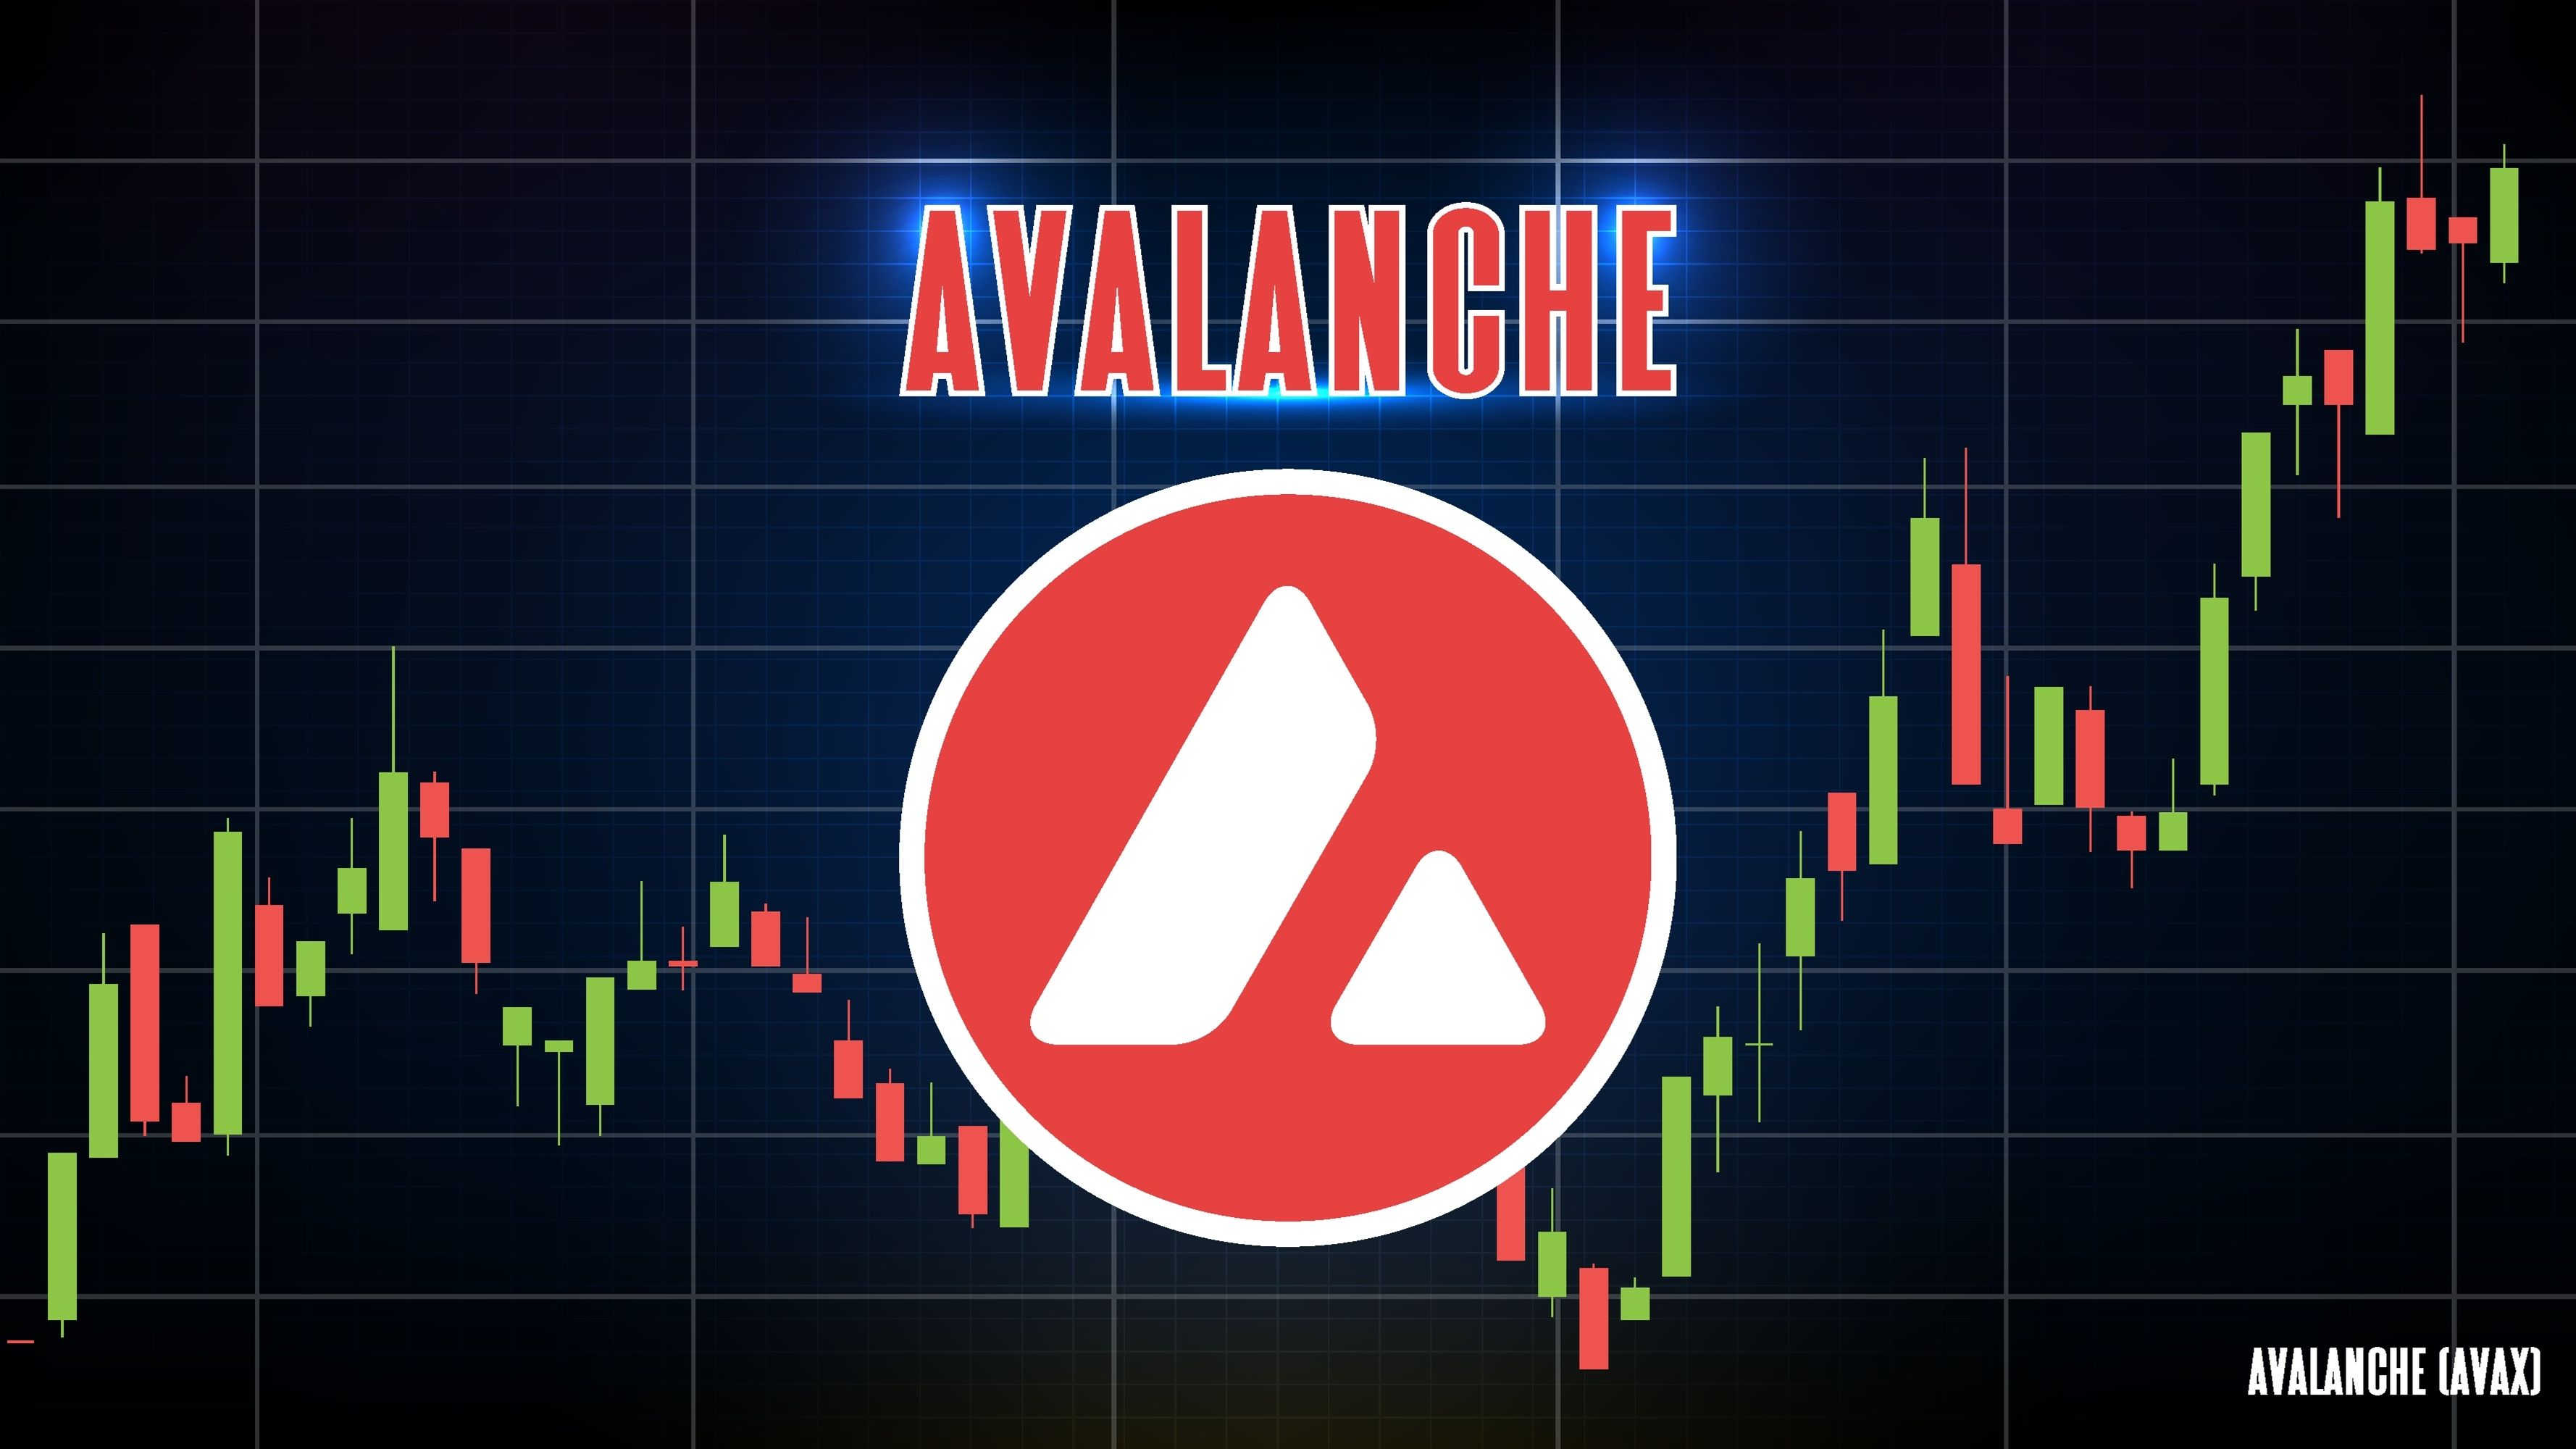 Why is Avalanche up by more than 13% on Tuesday?